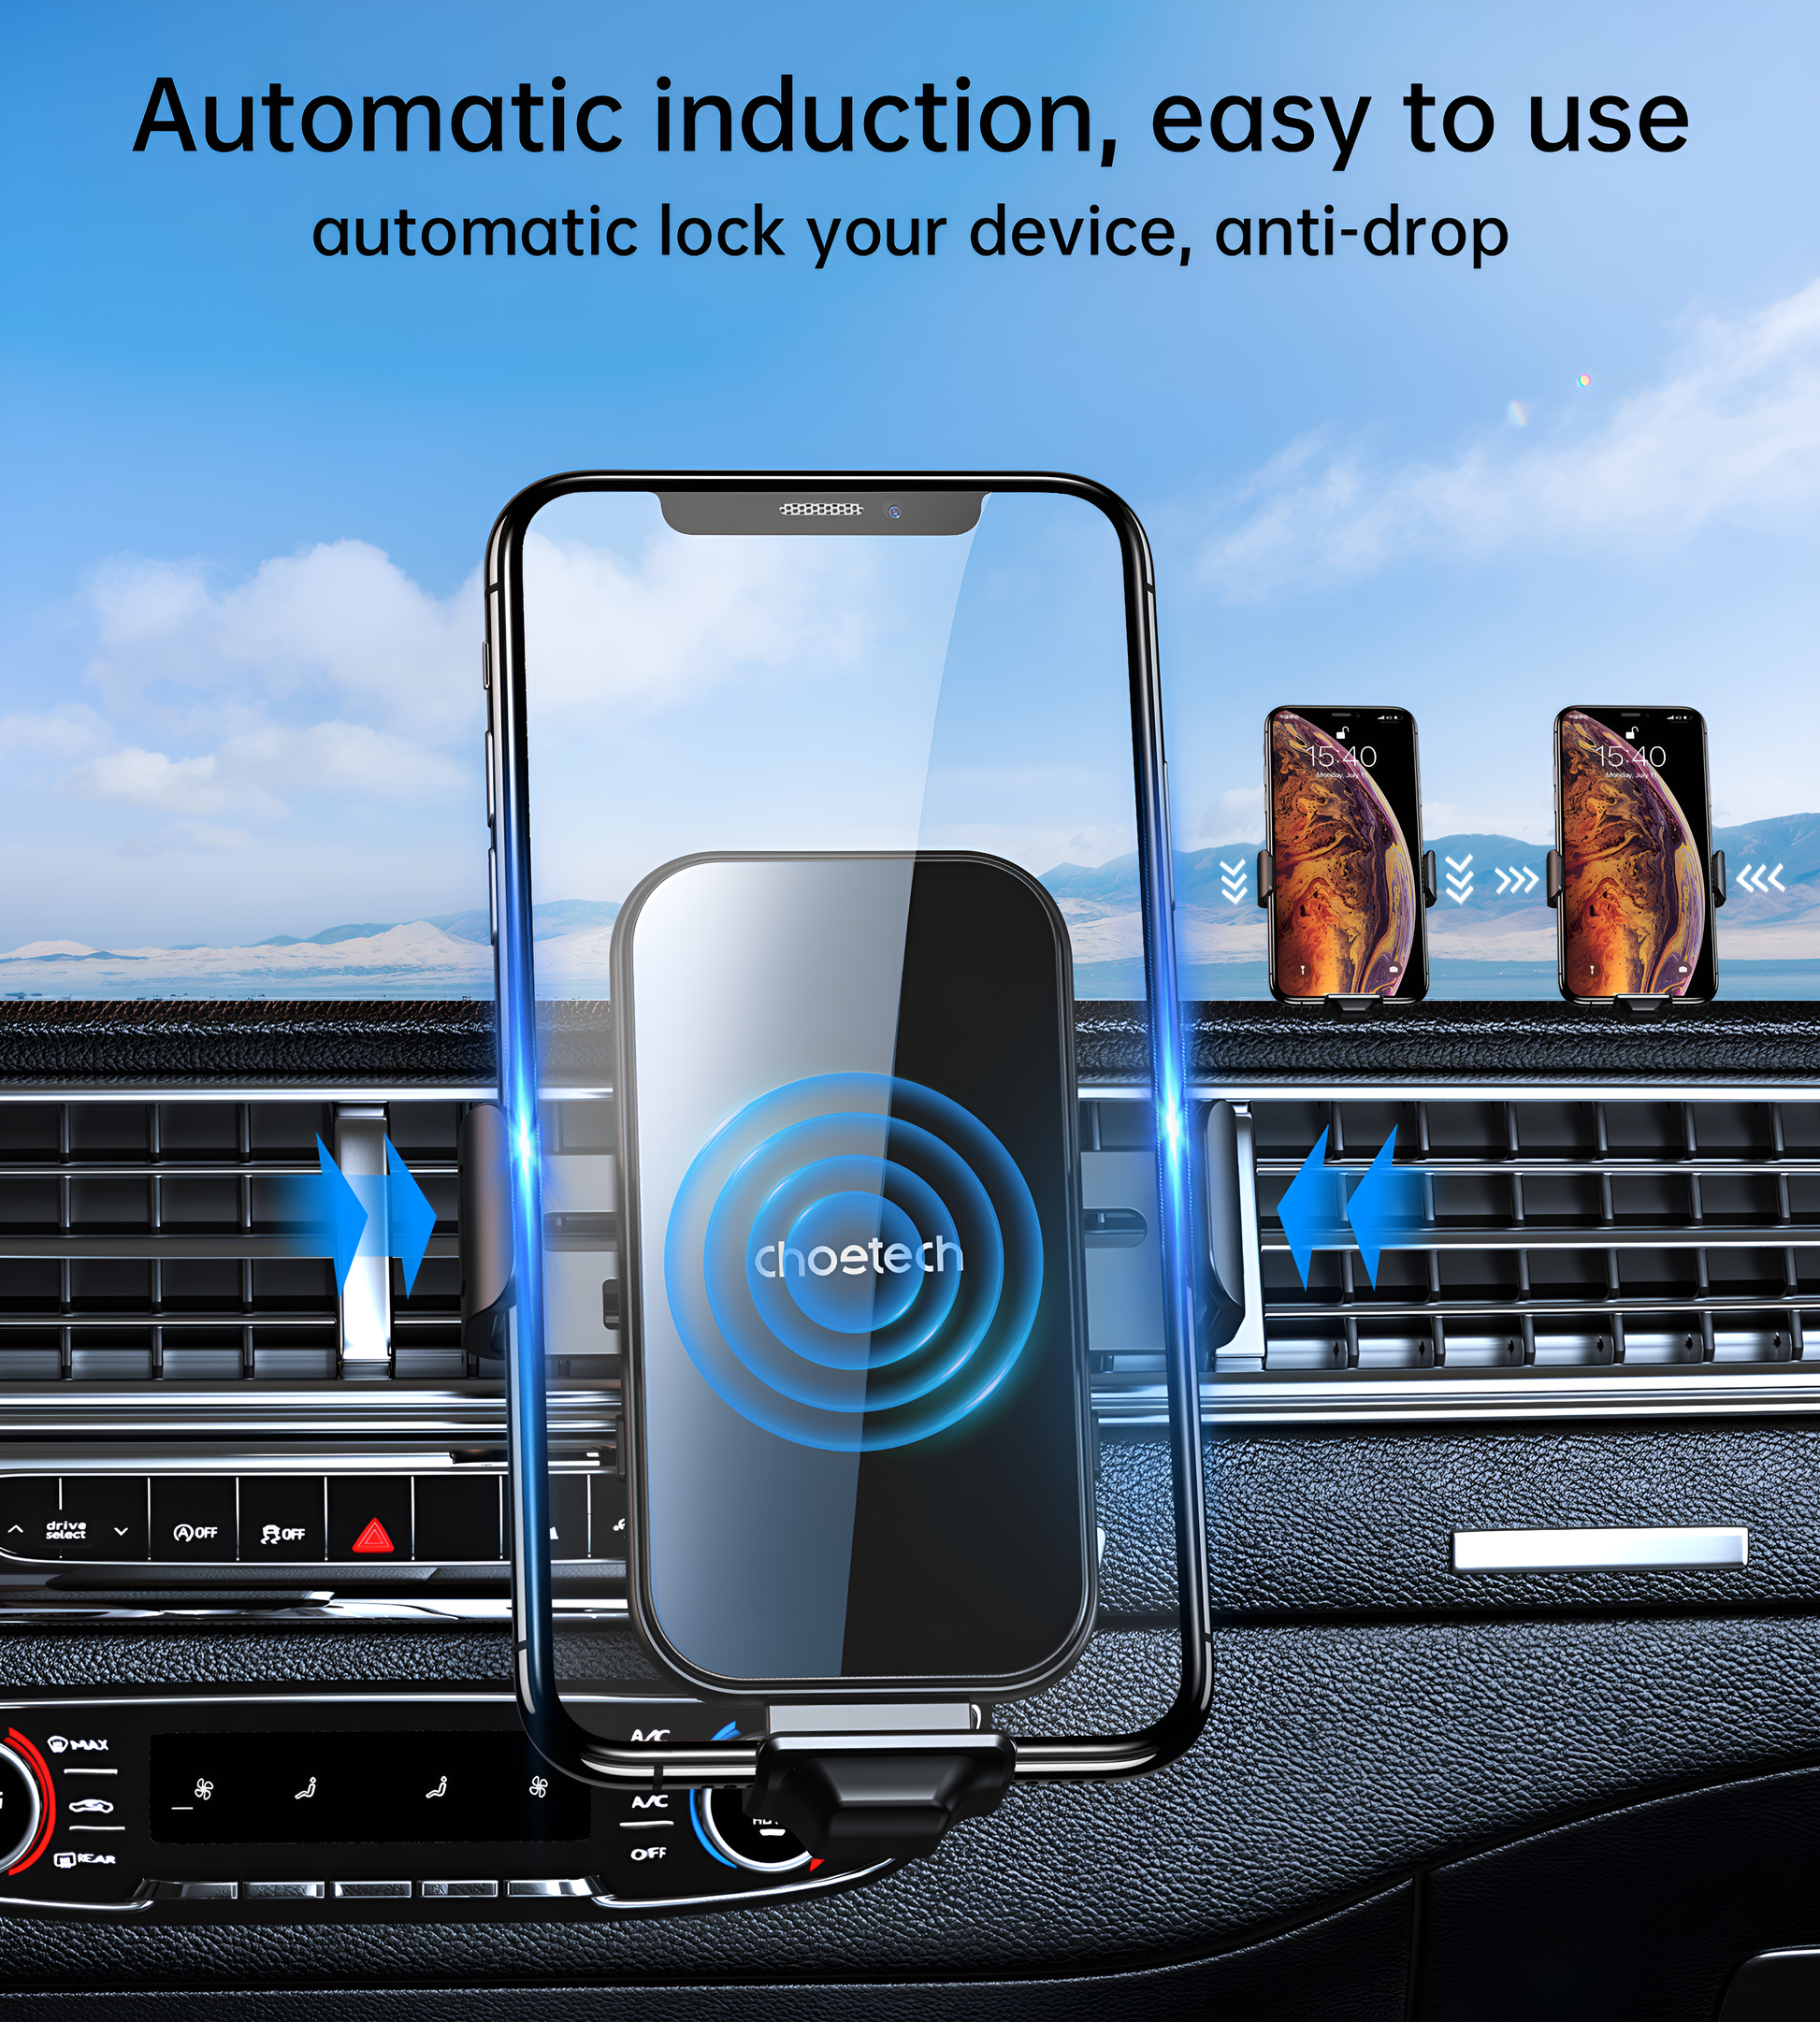 Choetech 10W Dashboard Mount Magnetic Wireless Car Charger for Iphone, T201-F.Automatic induction, easy to use automatic lock your device, anti-drop. JCBL accessories